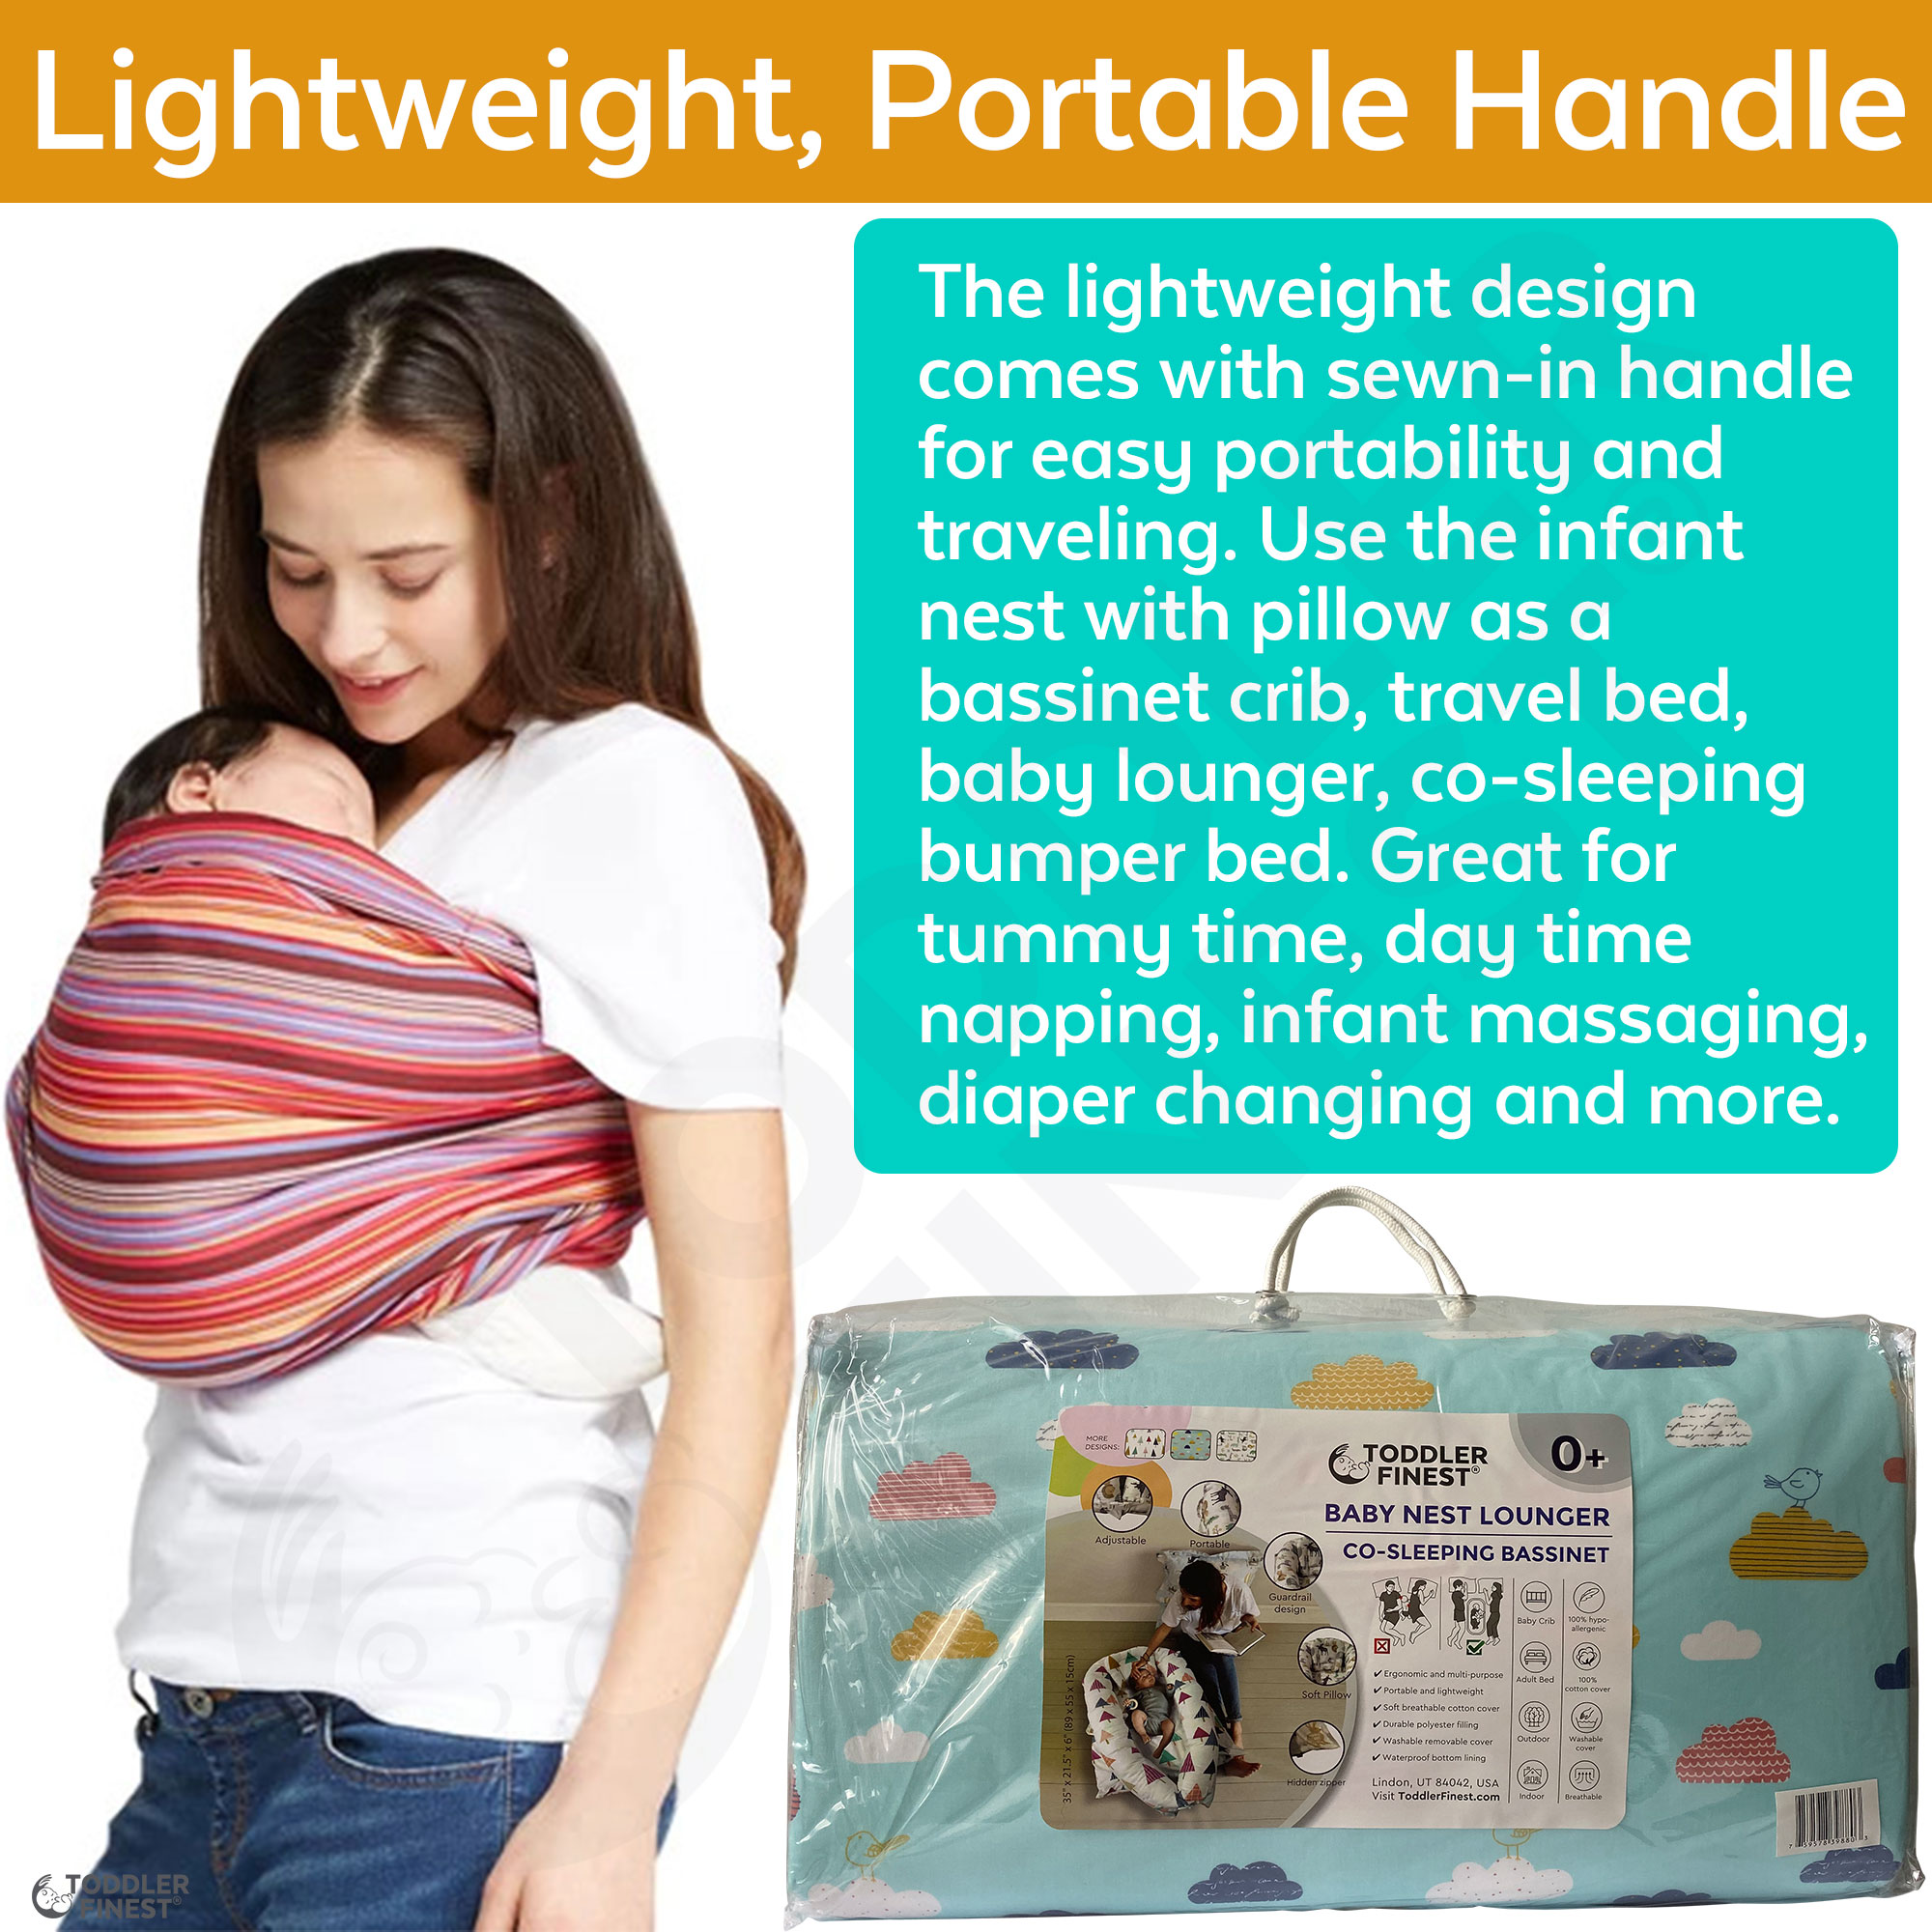 Travel Portable Nap Adjustable for Newborn Lounger Baby Gifts Essential Bed fits in Suitcase Macl Baby Lounger Sleeper Nest with Pillow Co-Sleeping Nest Newborn Cotton Lounger 